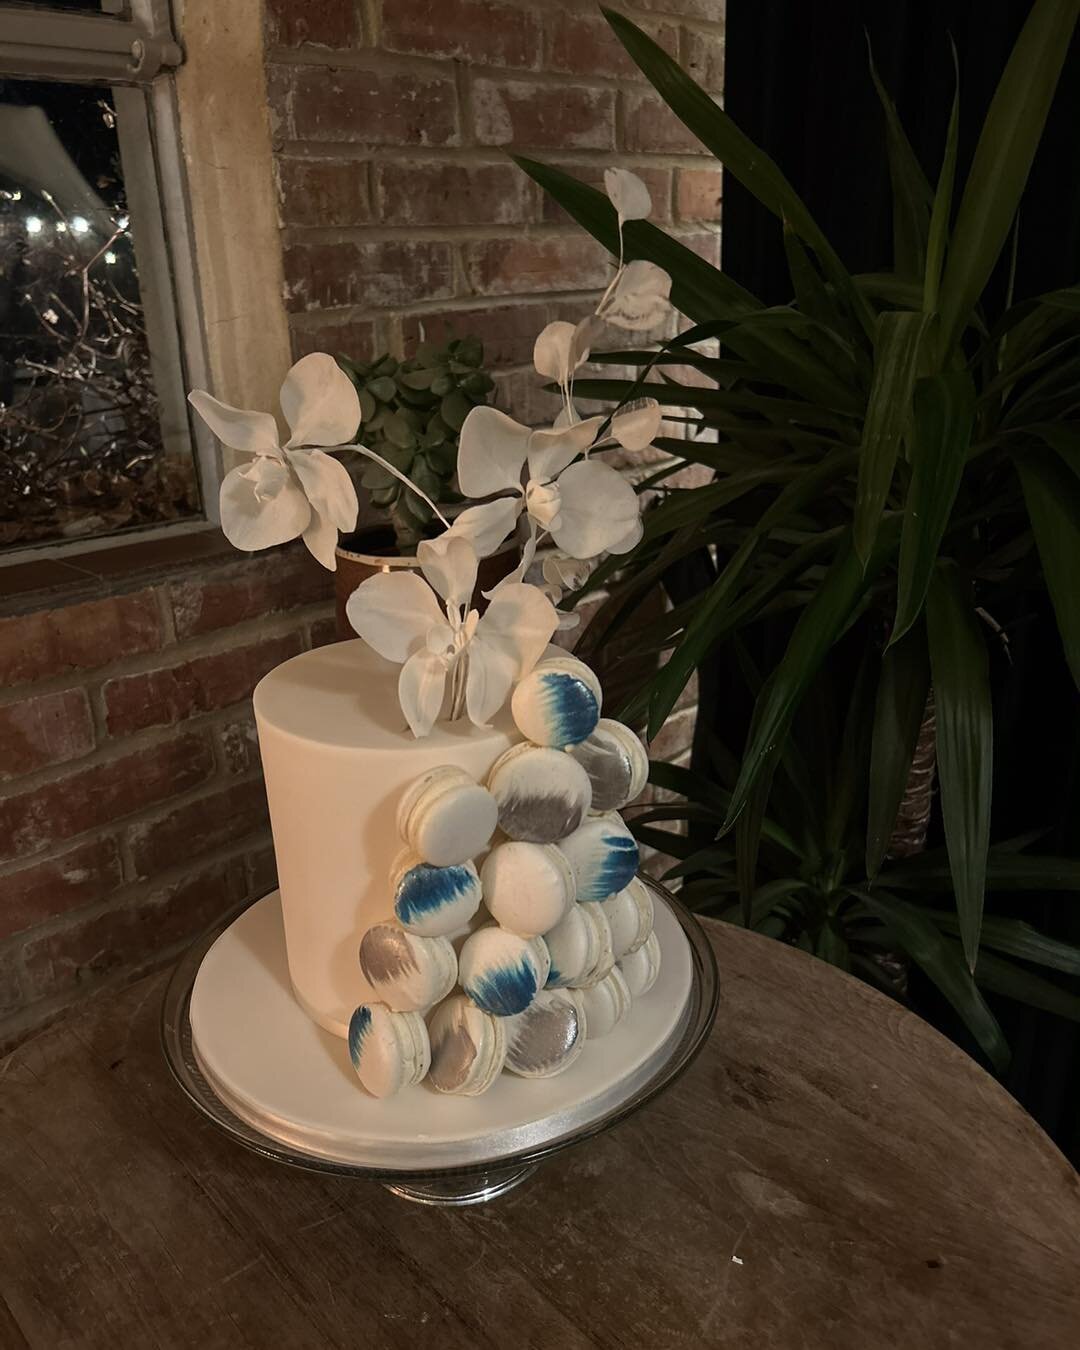 Happy Birthday to the lovely Kay from Pomp and Petals. I had an email from Kay a couple of weeks ago saying&hellip;&hellip;. We spoke earlier in the year about my birthday cake! Could I have a cake for 38 guests the colours are White, Silver and Teal